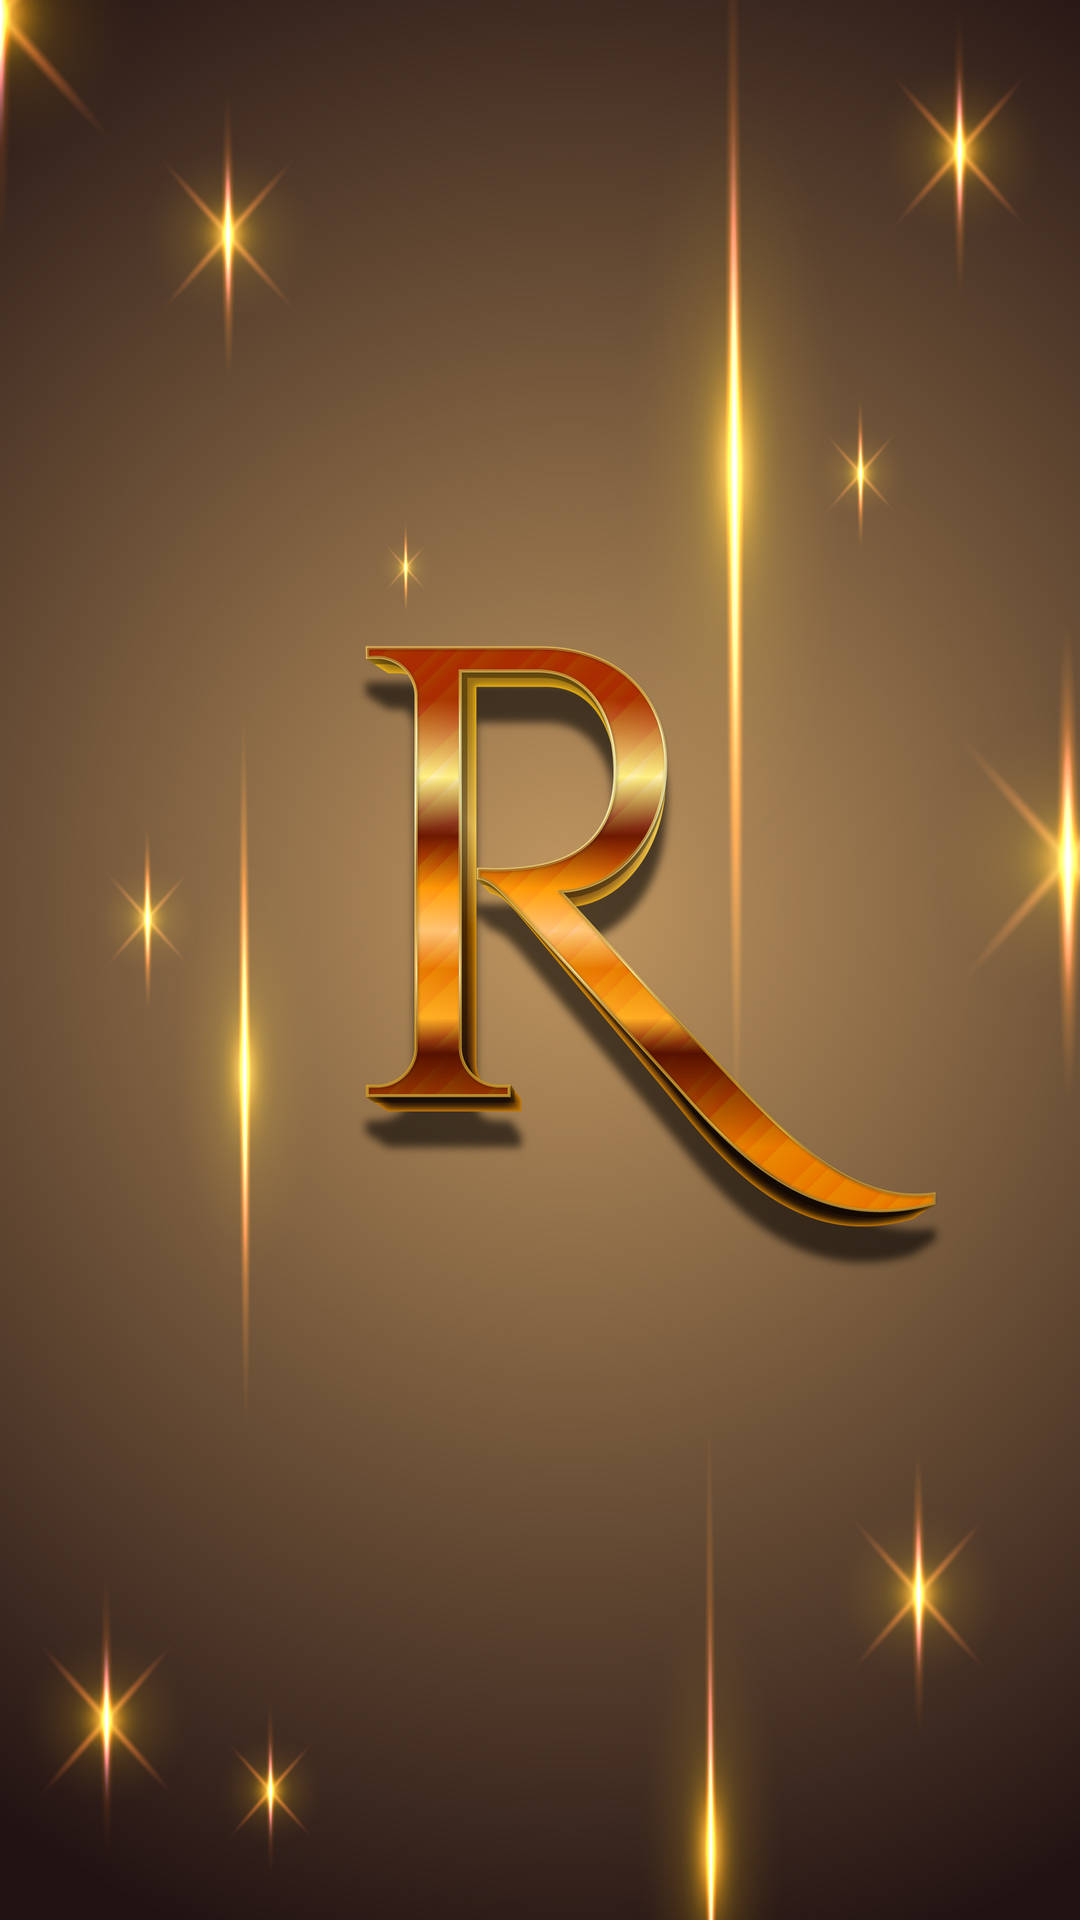 Free R Alphabet Wallpaper Downloads, [100+] R Alphabet Wallpapers for FREE  